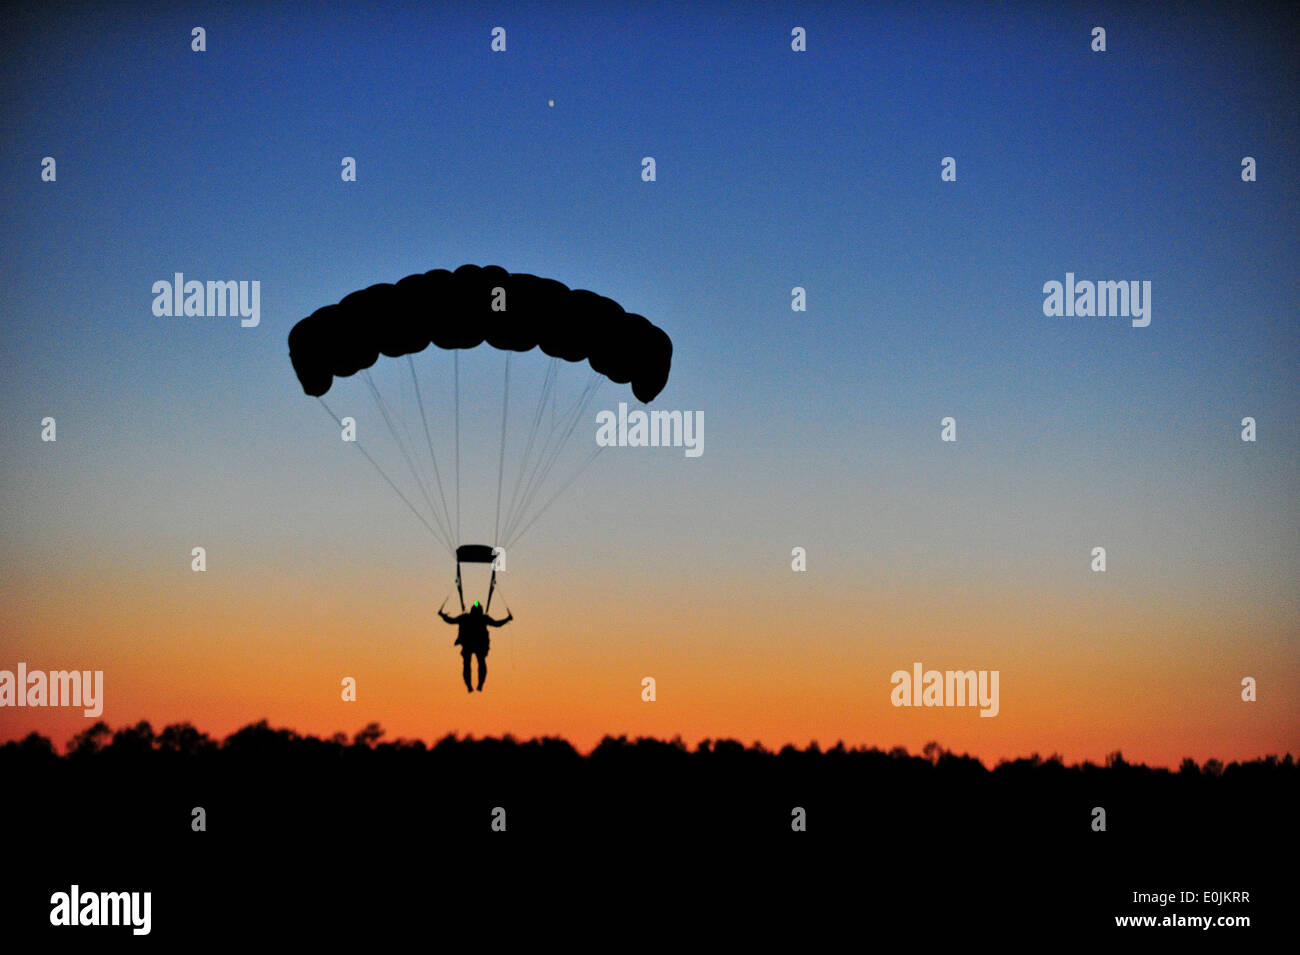 A U.S. Army Special Forces soldier practices a high altitude low opening (H.A.L.O.) jumps during Emerald Warrior 2012, Hurlbur Stock Photo